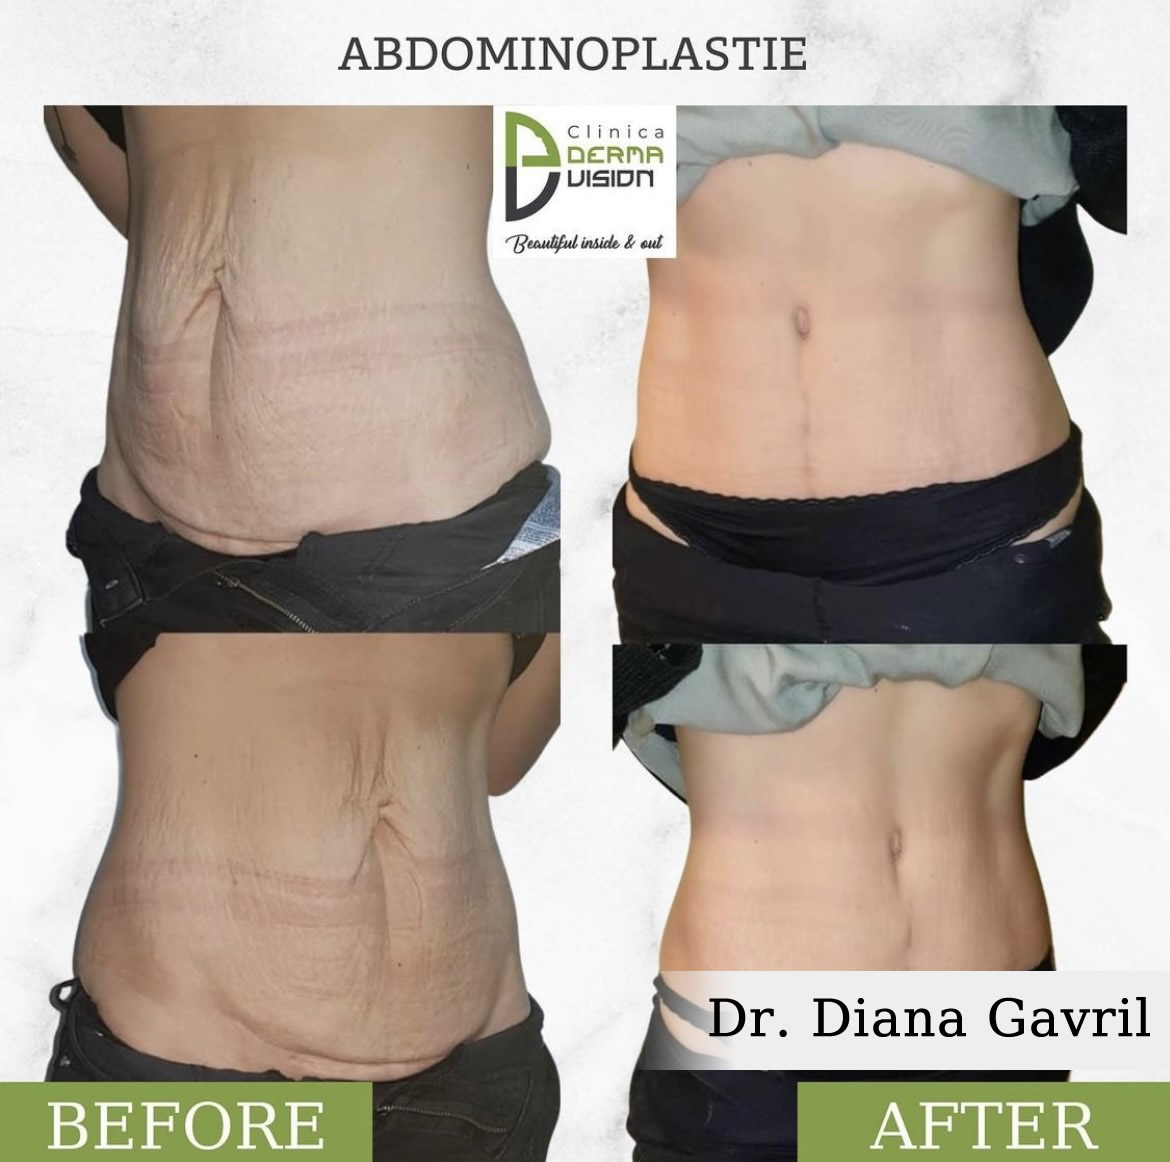 before-after3 Abdominoplastia